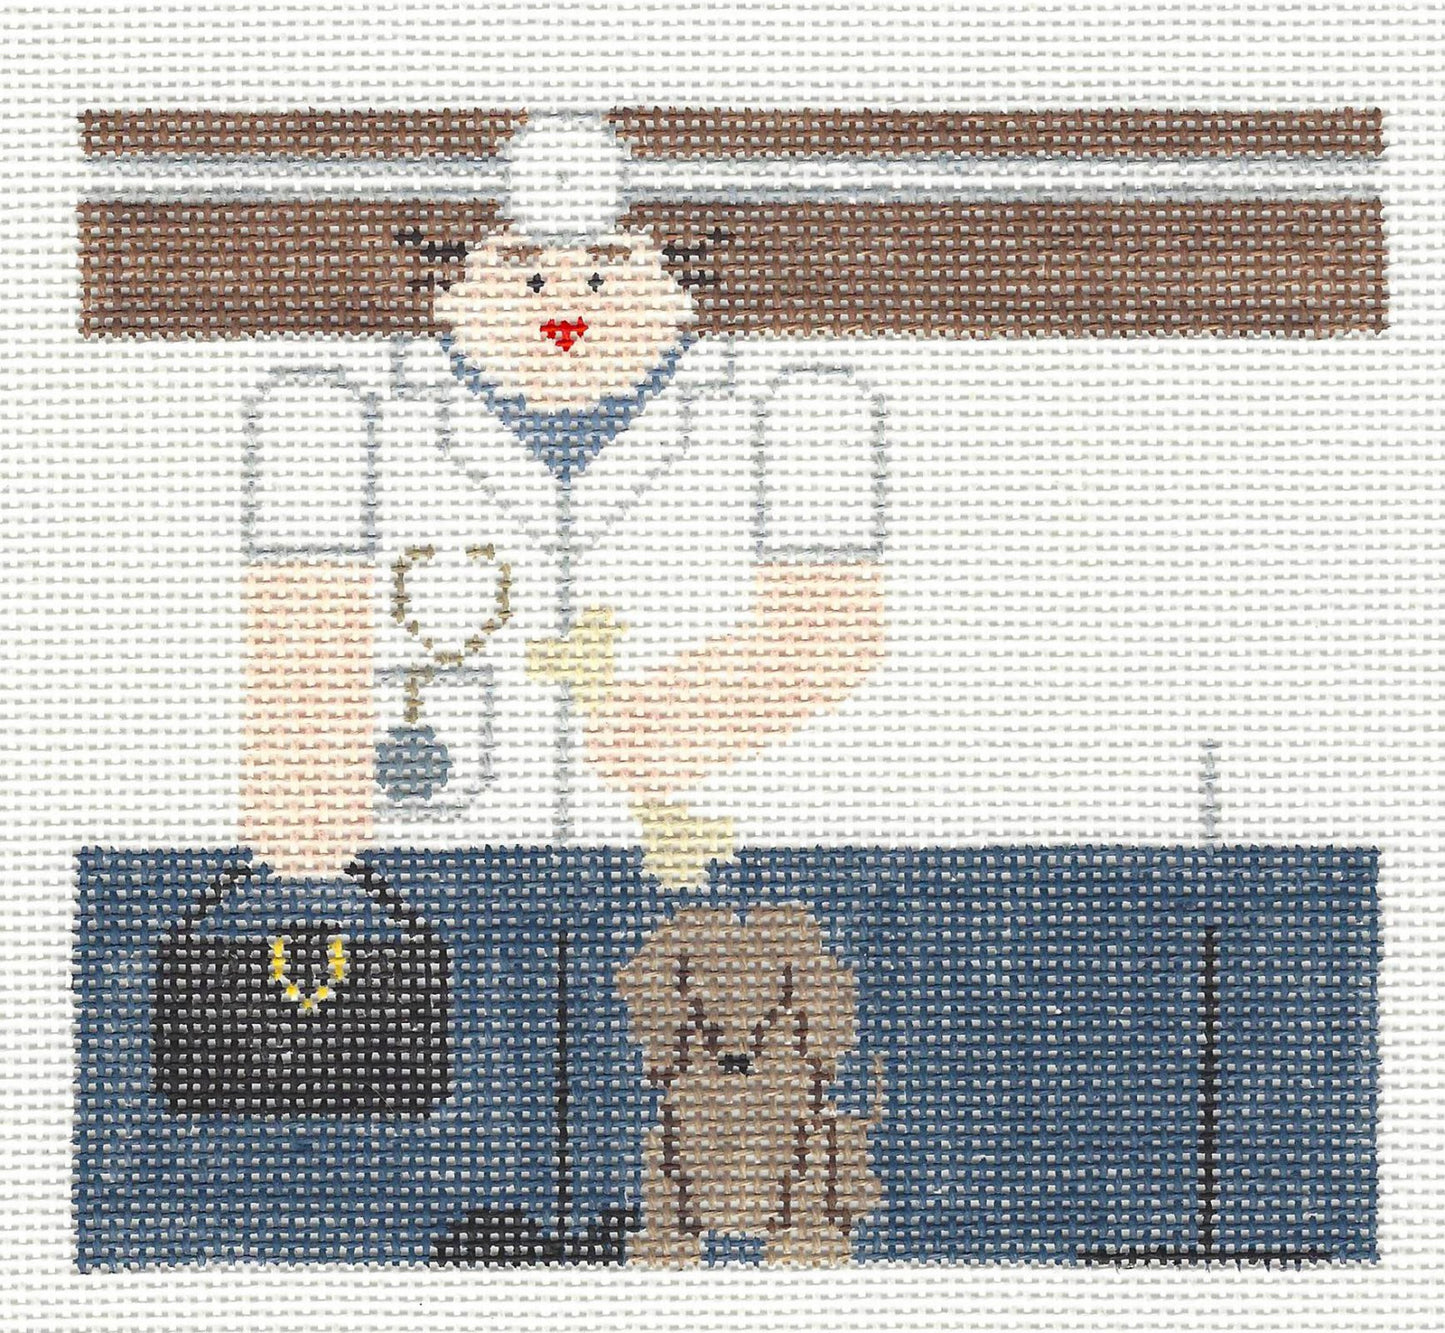 Roll Up ~ Veterinarian and Puppy Friend handpainted Needlepoint Canvas by Kathy Schenkel **SP.ORDER**